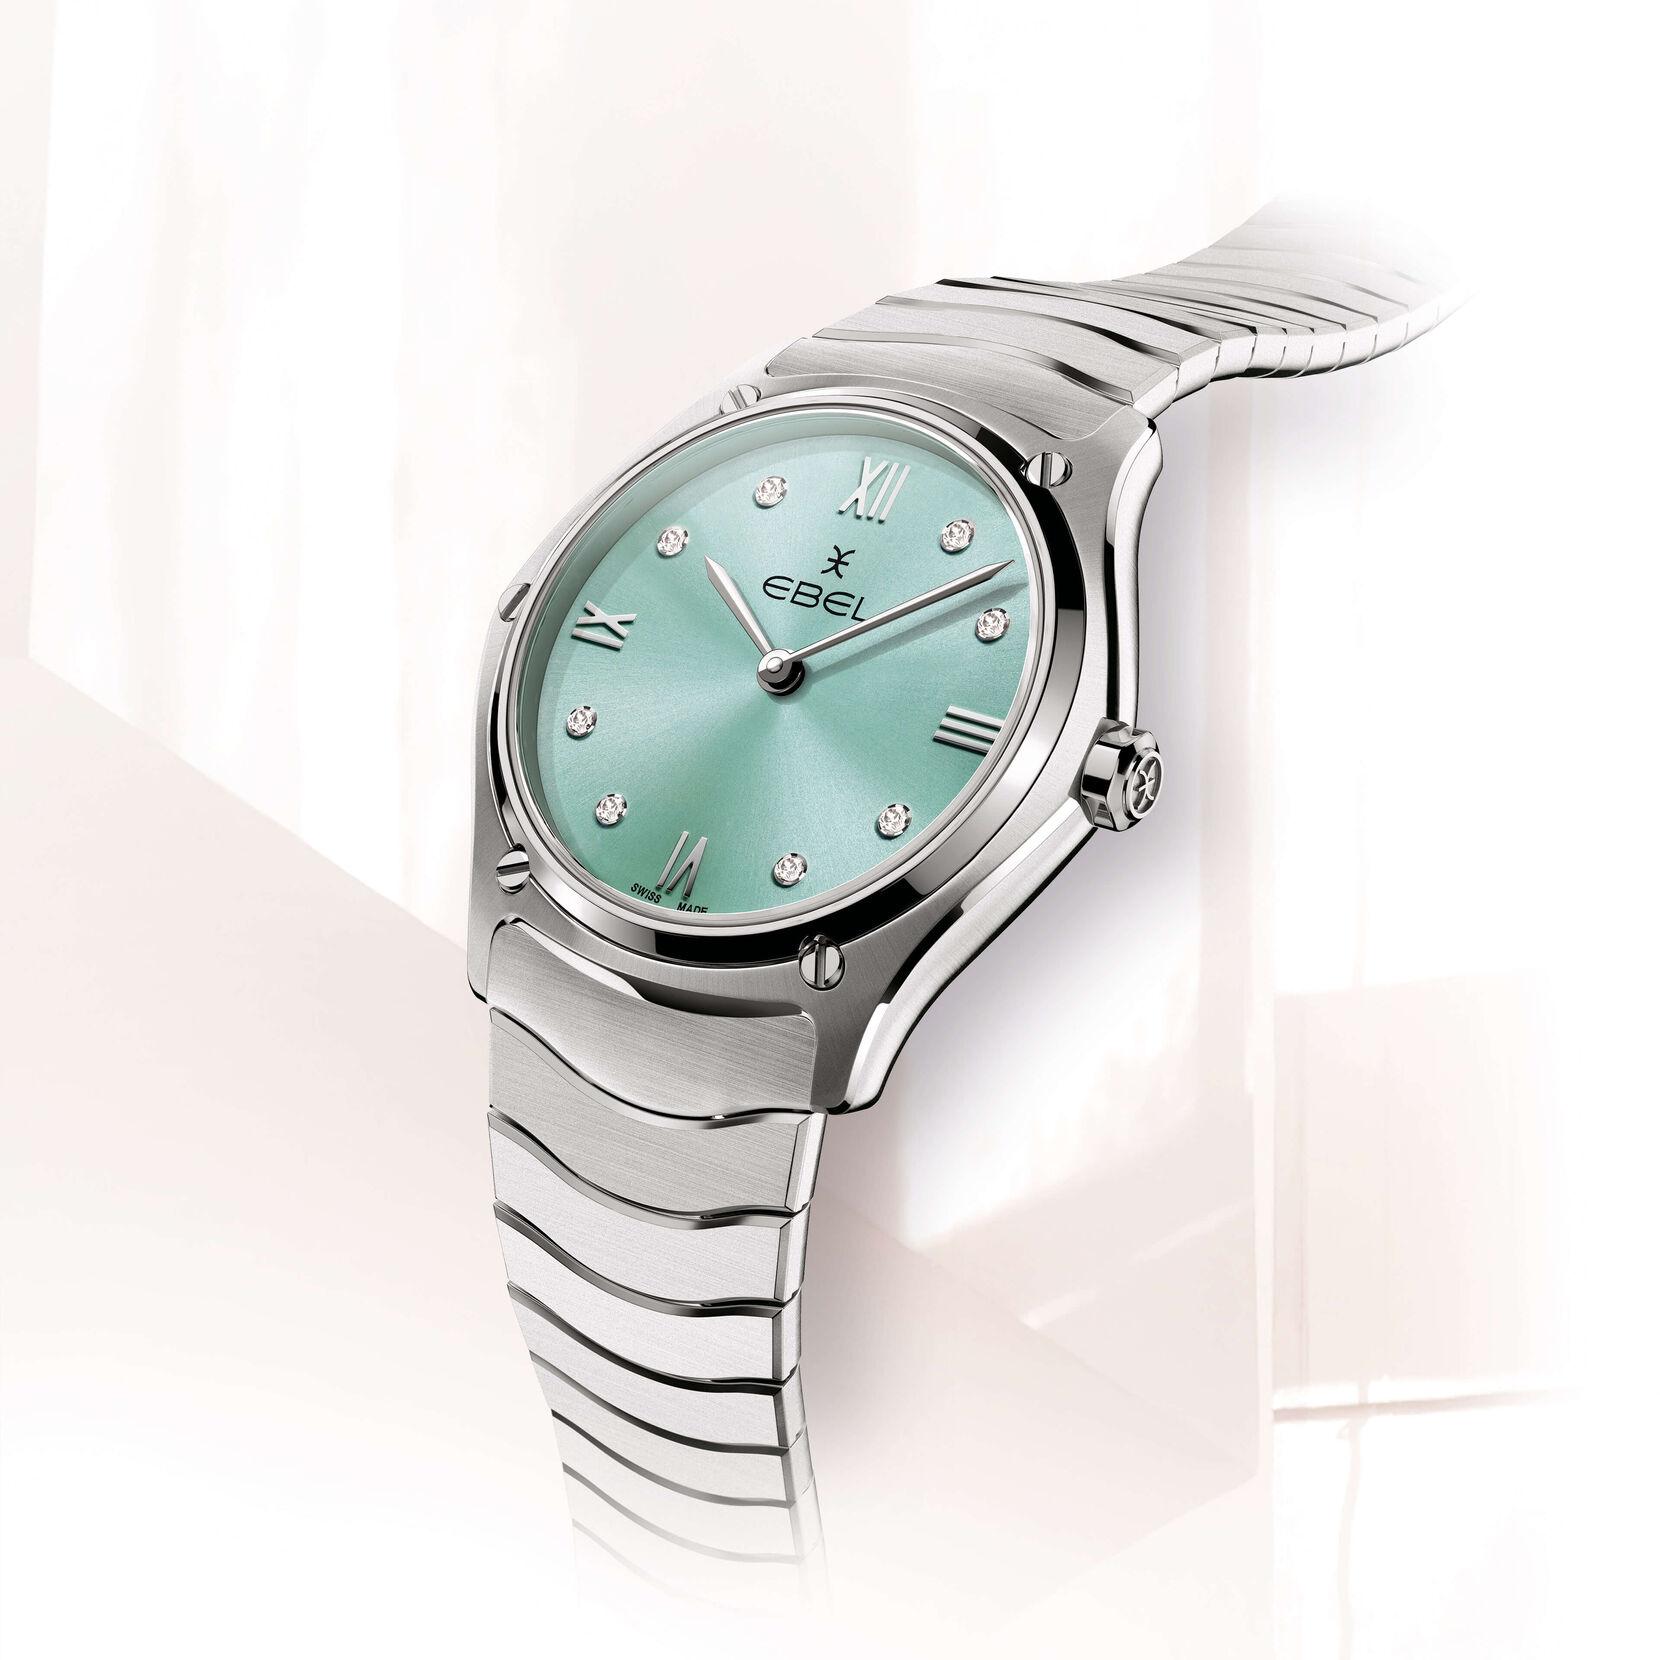 Ebel Sport Classic Ladies watch with Mint Blue Dial and Diamond Accents 0